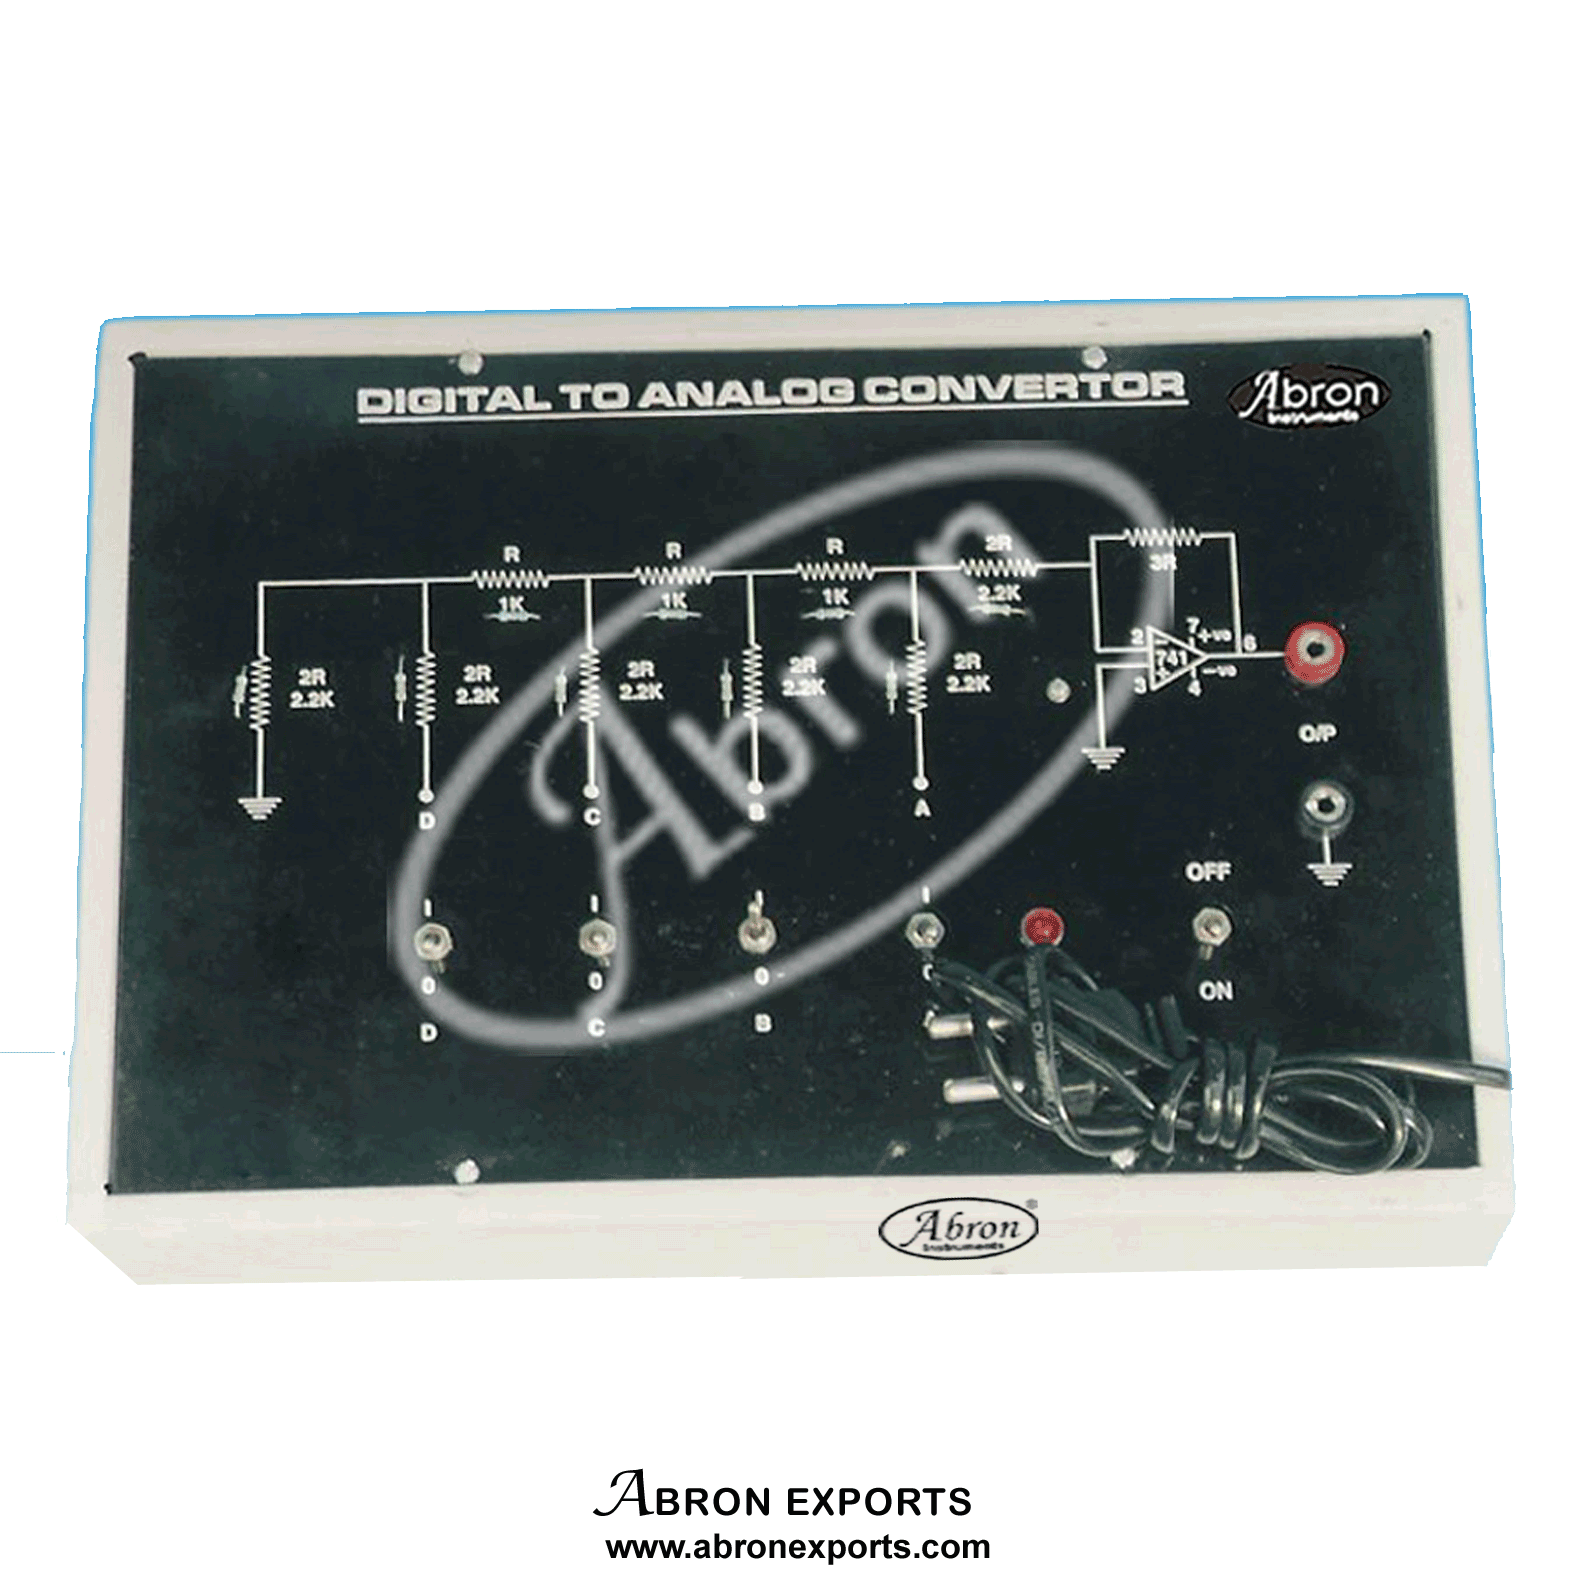 Analog to Digital Convertor with power supply AE-1247B  A to D with power supply in box with patch cord truth table 